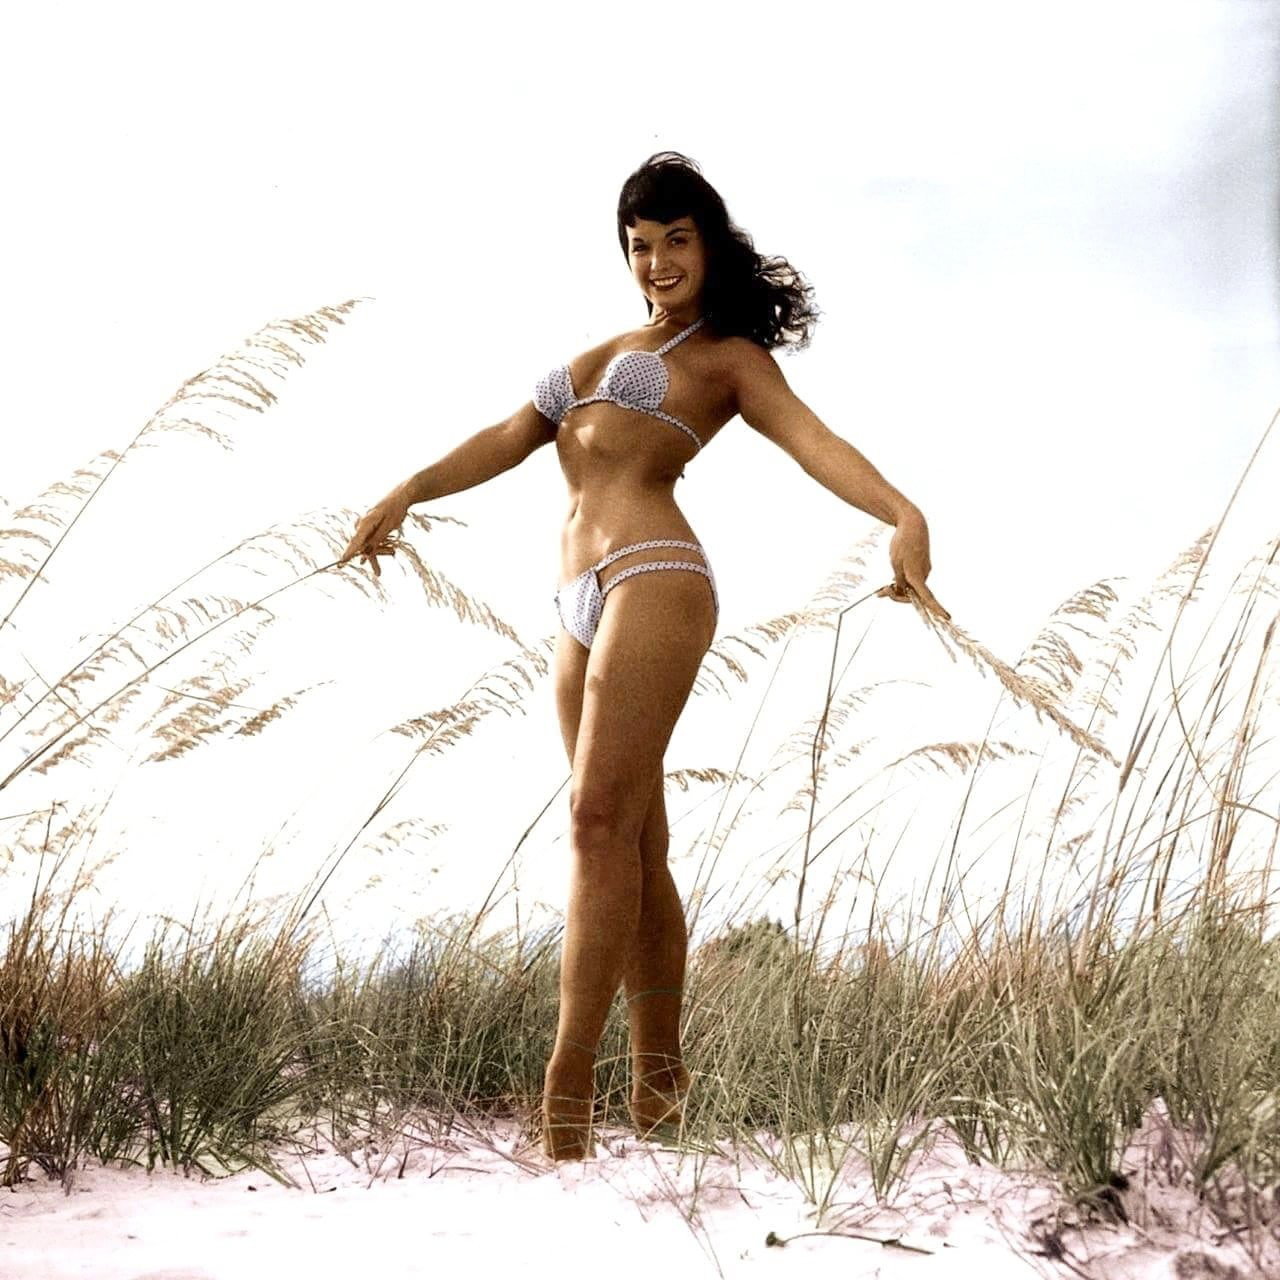 Photo by Capt Shatterdabs with the username @plunderingbooty,  January 12, 2020 at 8:08 AM. The post is about the topic Bettie Page